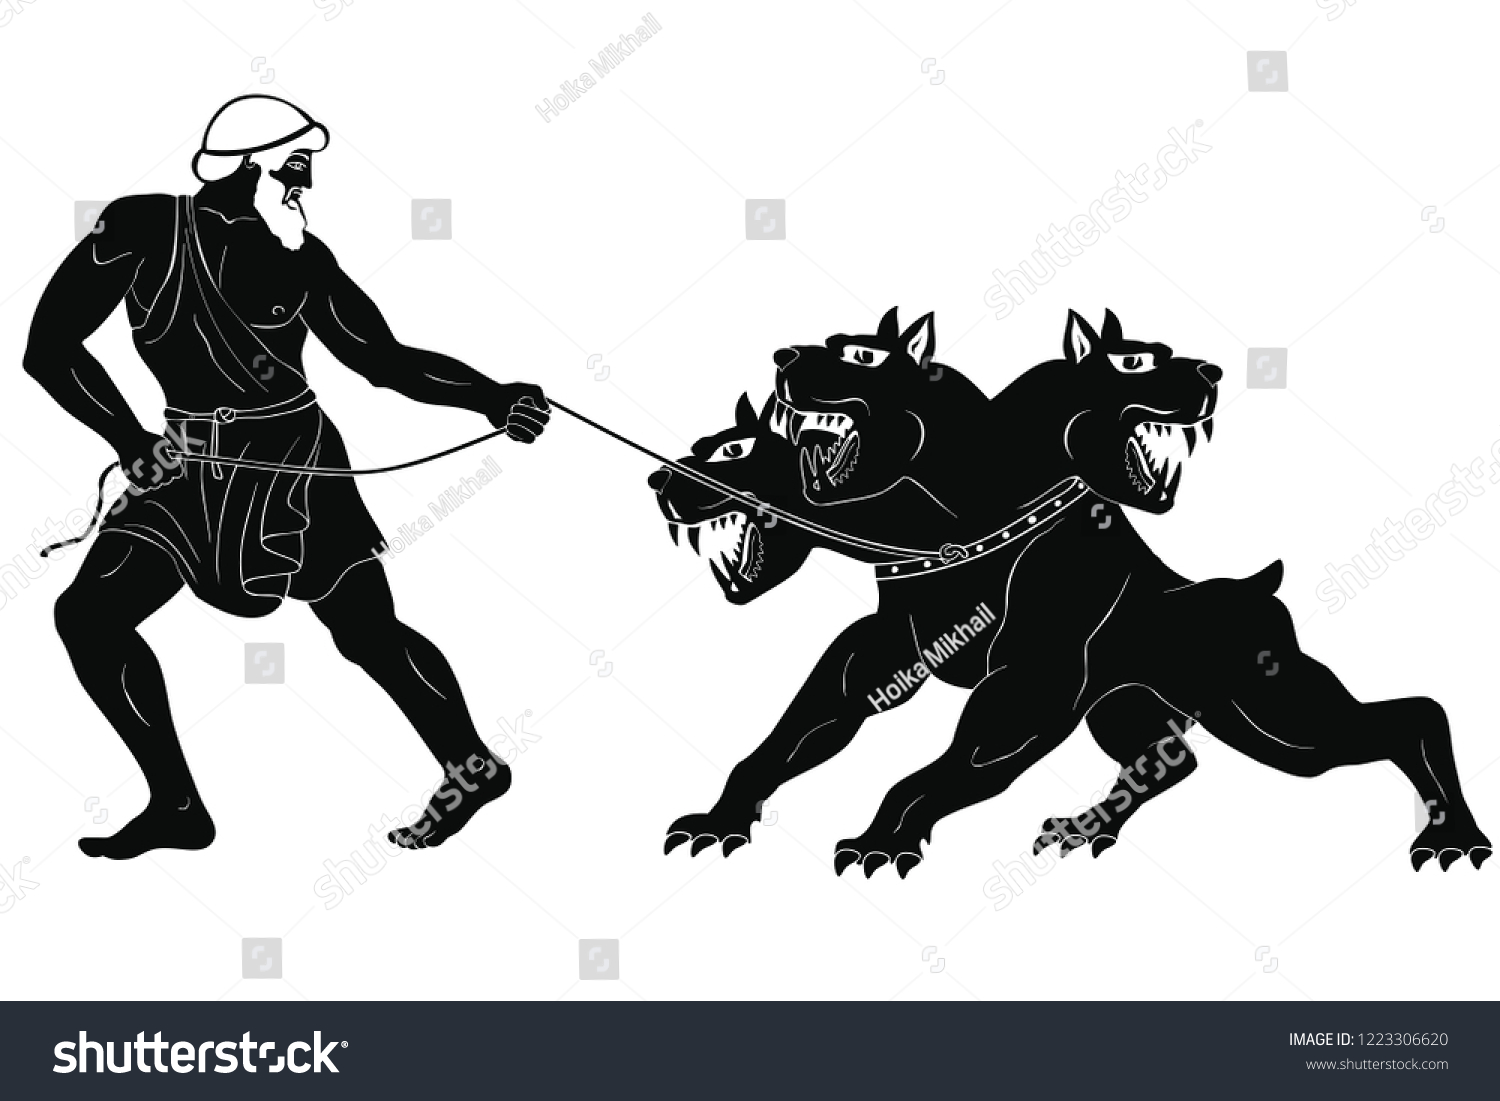 SVG of Hercules abducts Cerberus from Hell. Figure isolated on white background. svg